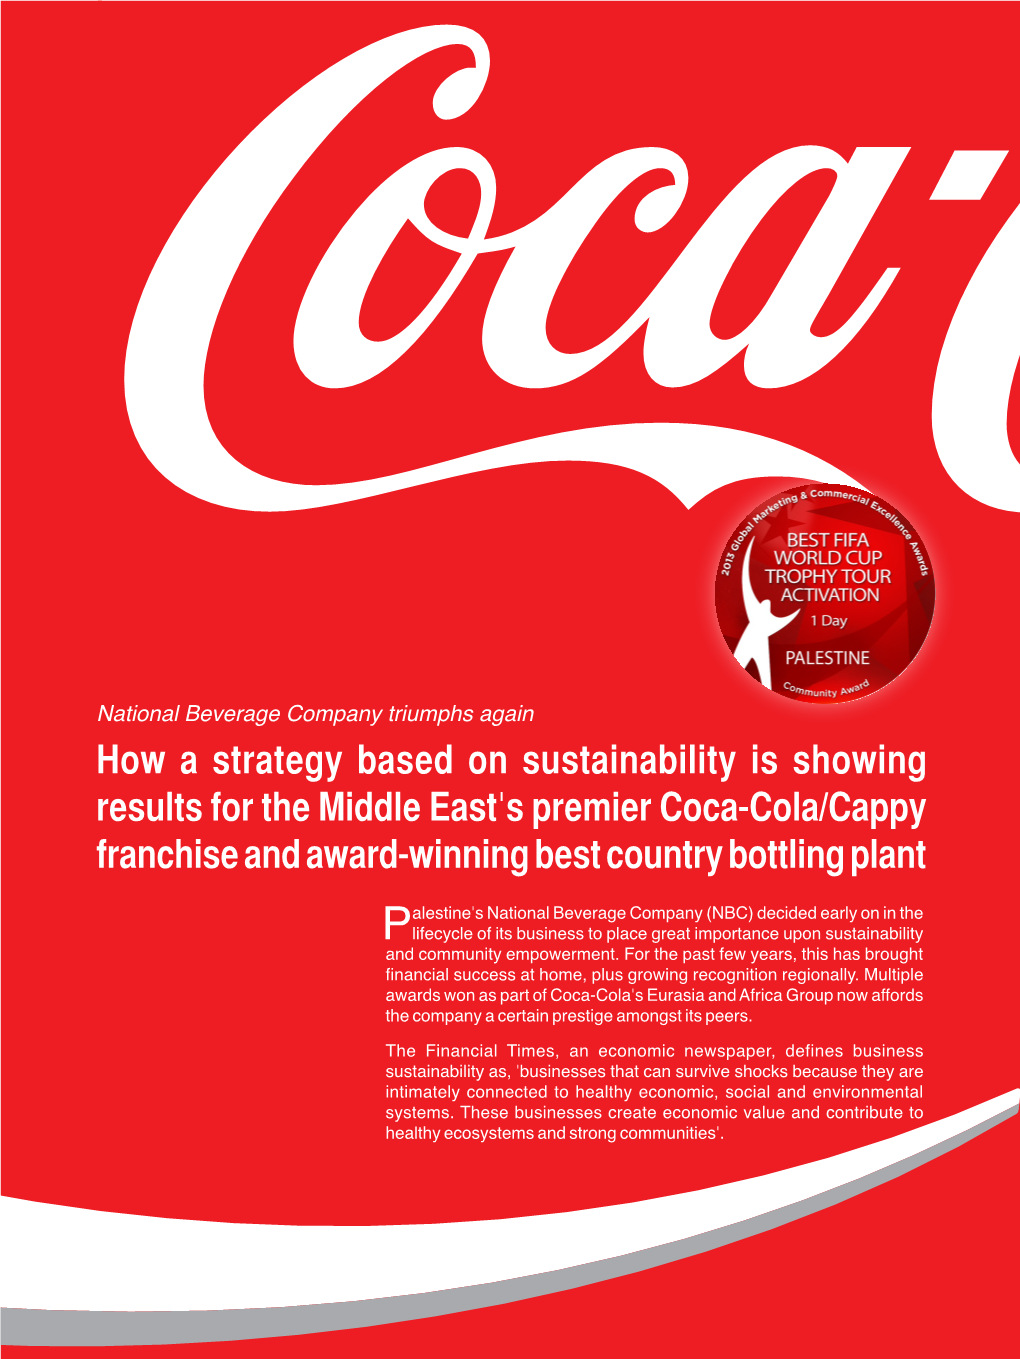 How a Strategy Based on Sustainability Is Showing Results for the Middle East's Premier Coca-Cola/Cappy Franchise and Award-Winning Best Country Bottling Plant